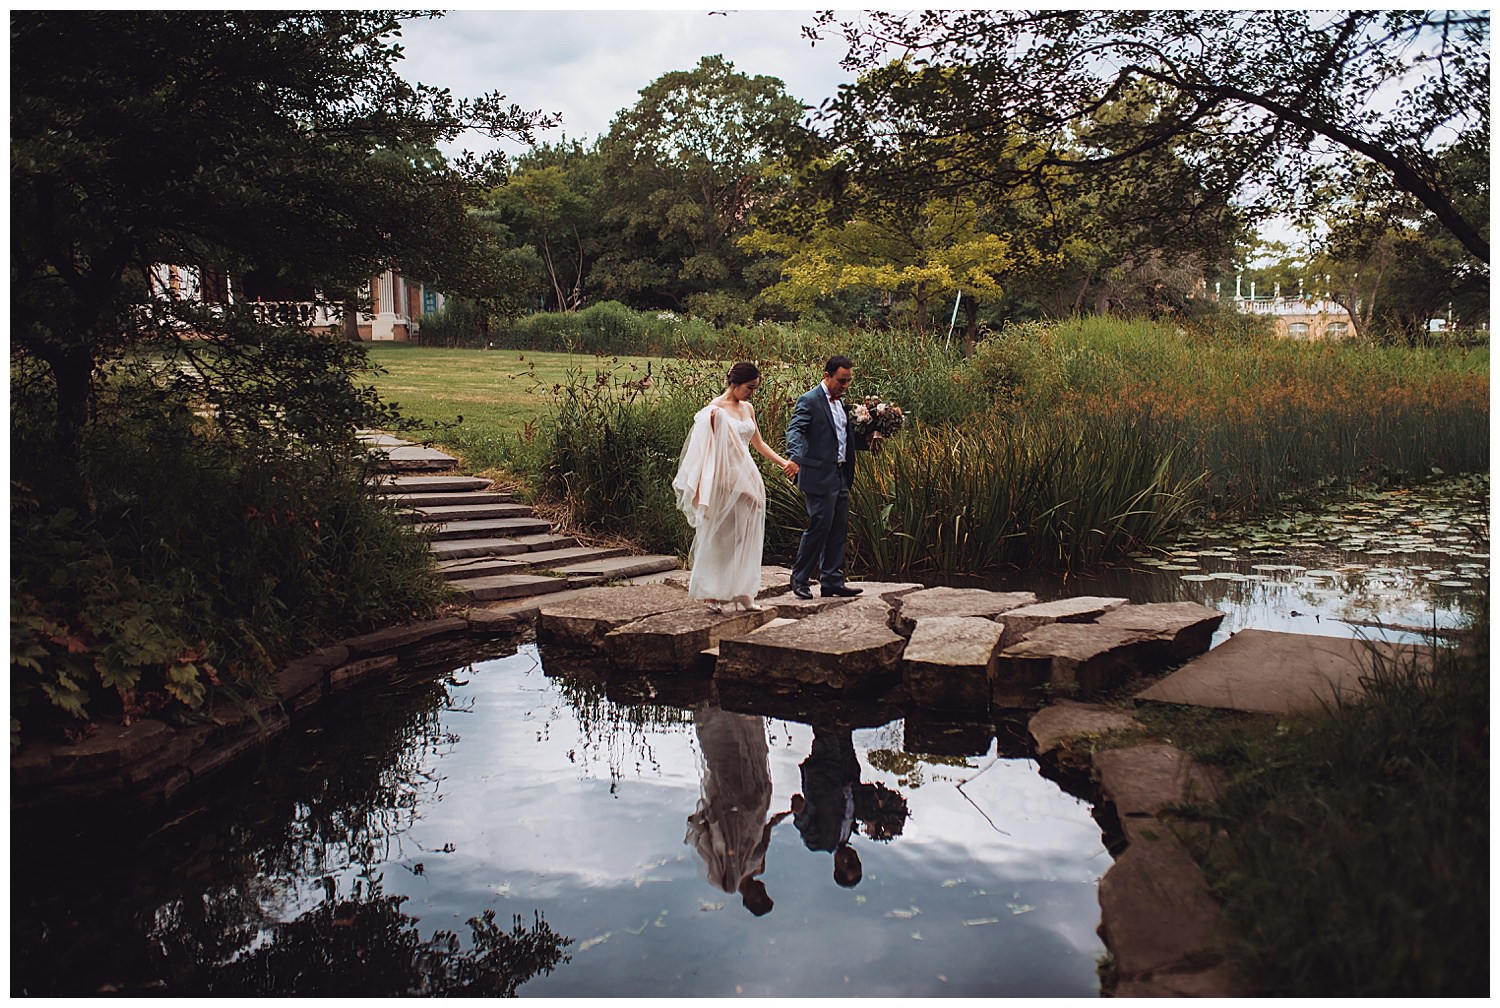 Columbus Park Refectory Wedding, bride and groom walking over a pond